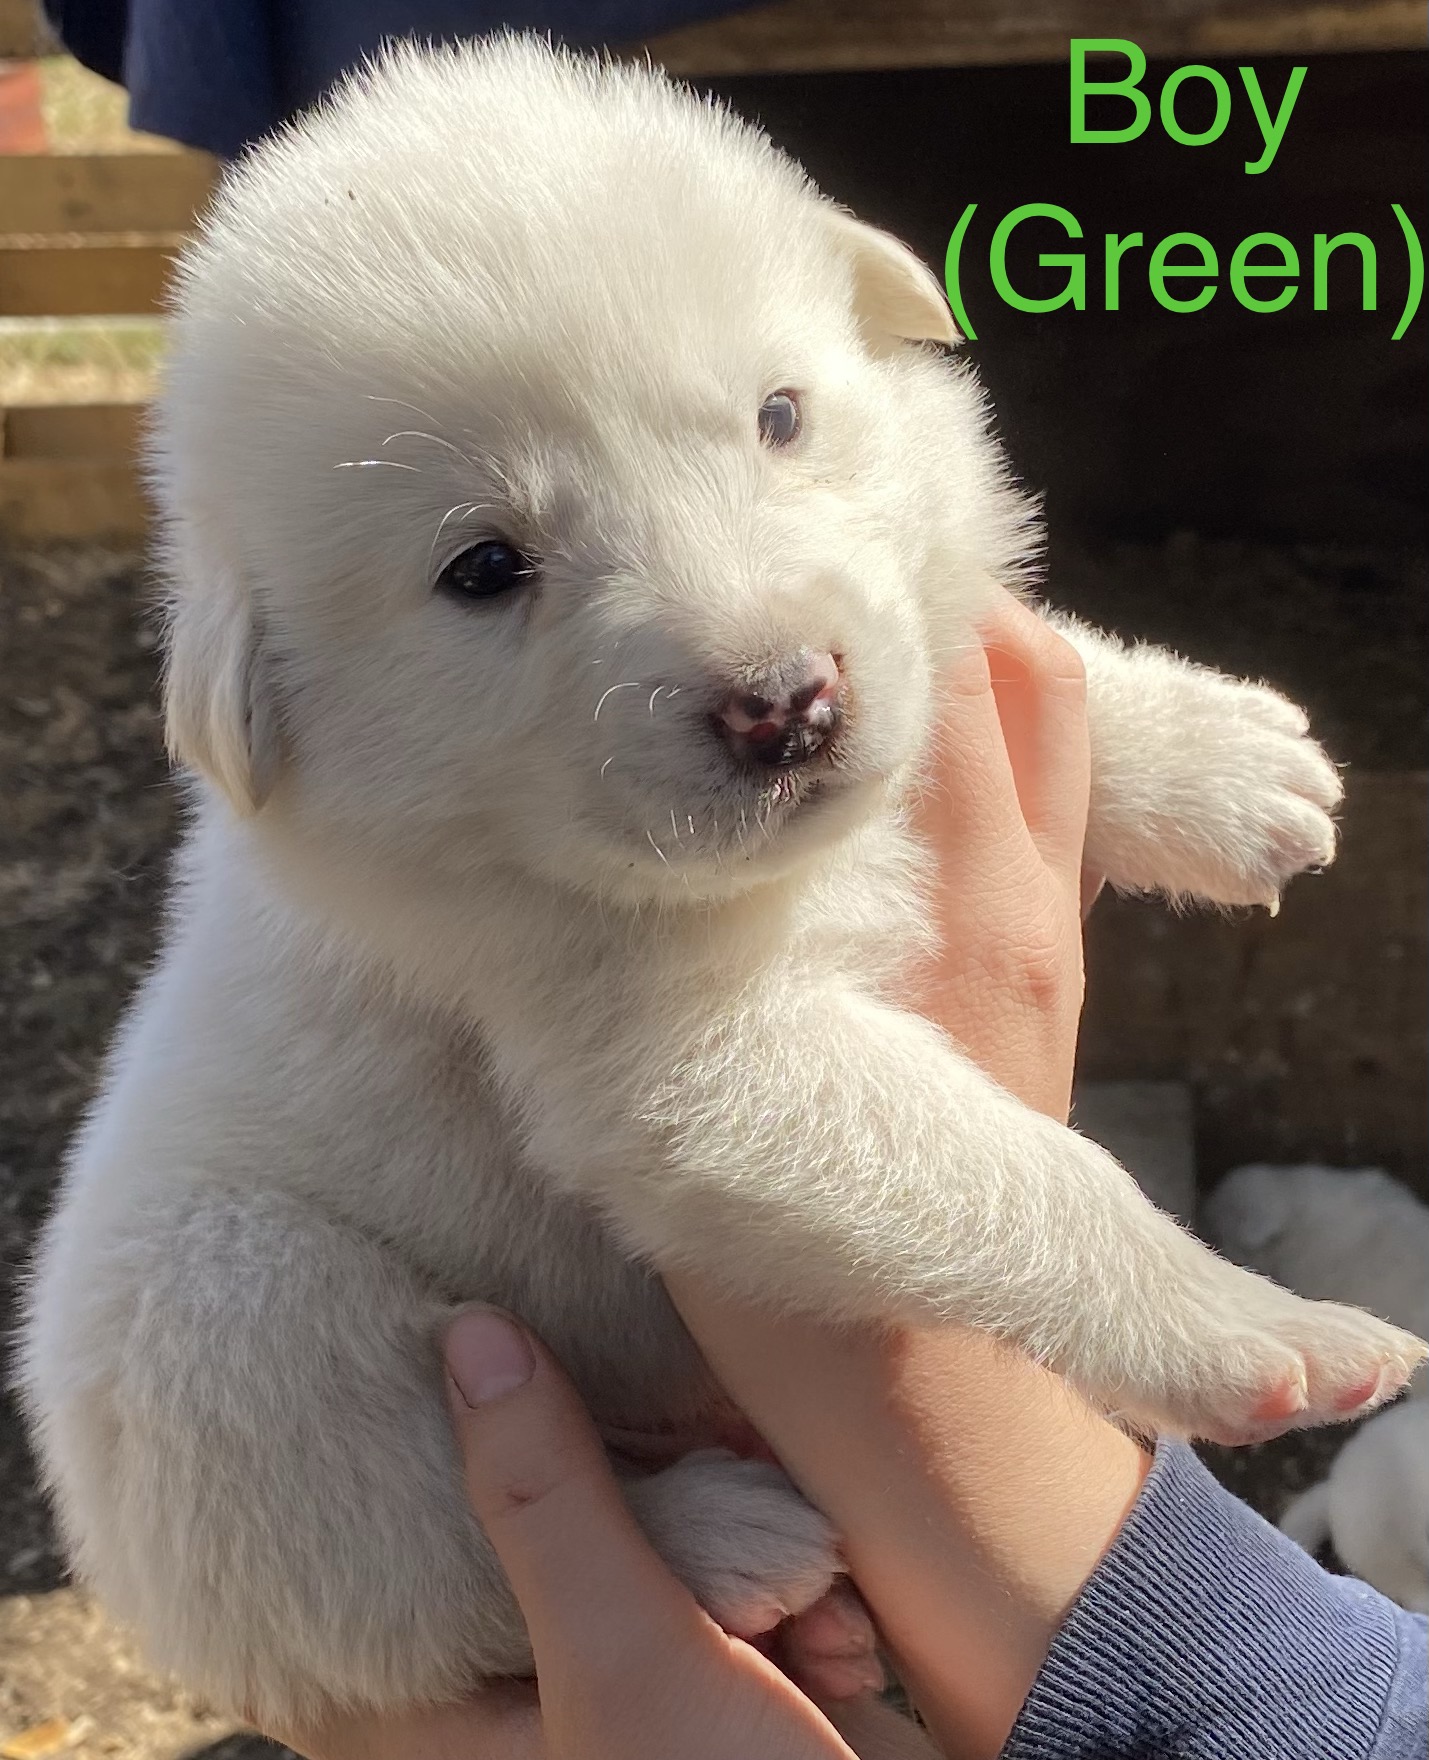 LGD puppies for sale